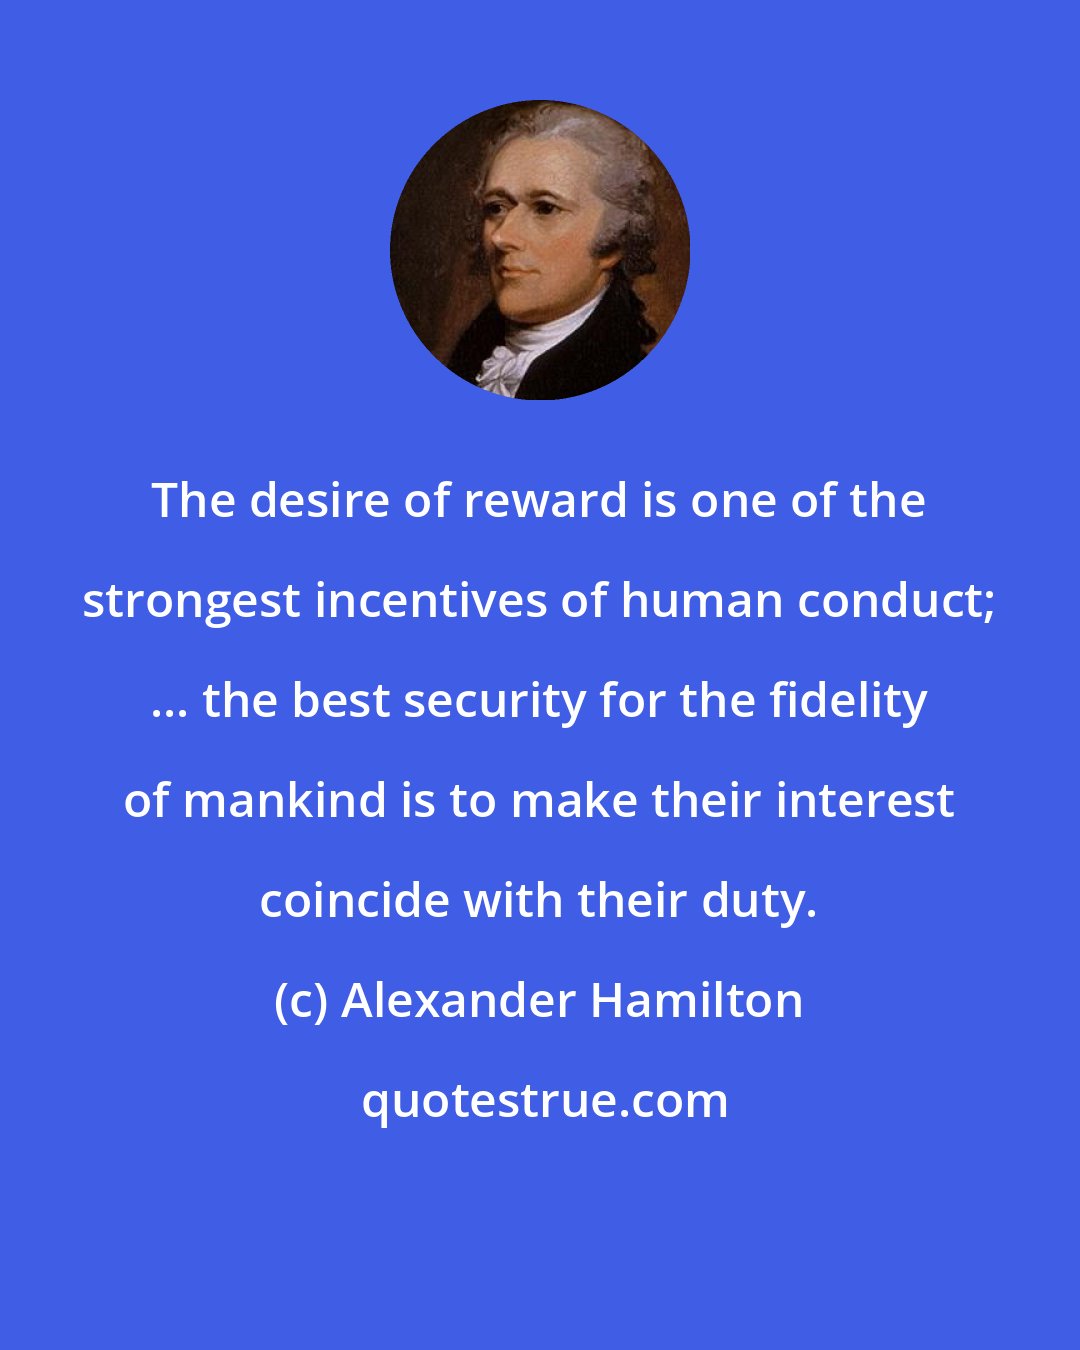 Alexander Hamilton: The desire of reward is one of the strongest incentives of human conduct; ... the best security for the fidelity of mankind is to make their interest coincide with their duty.